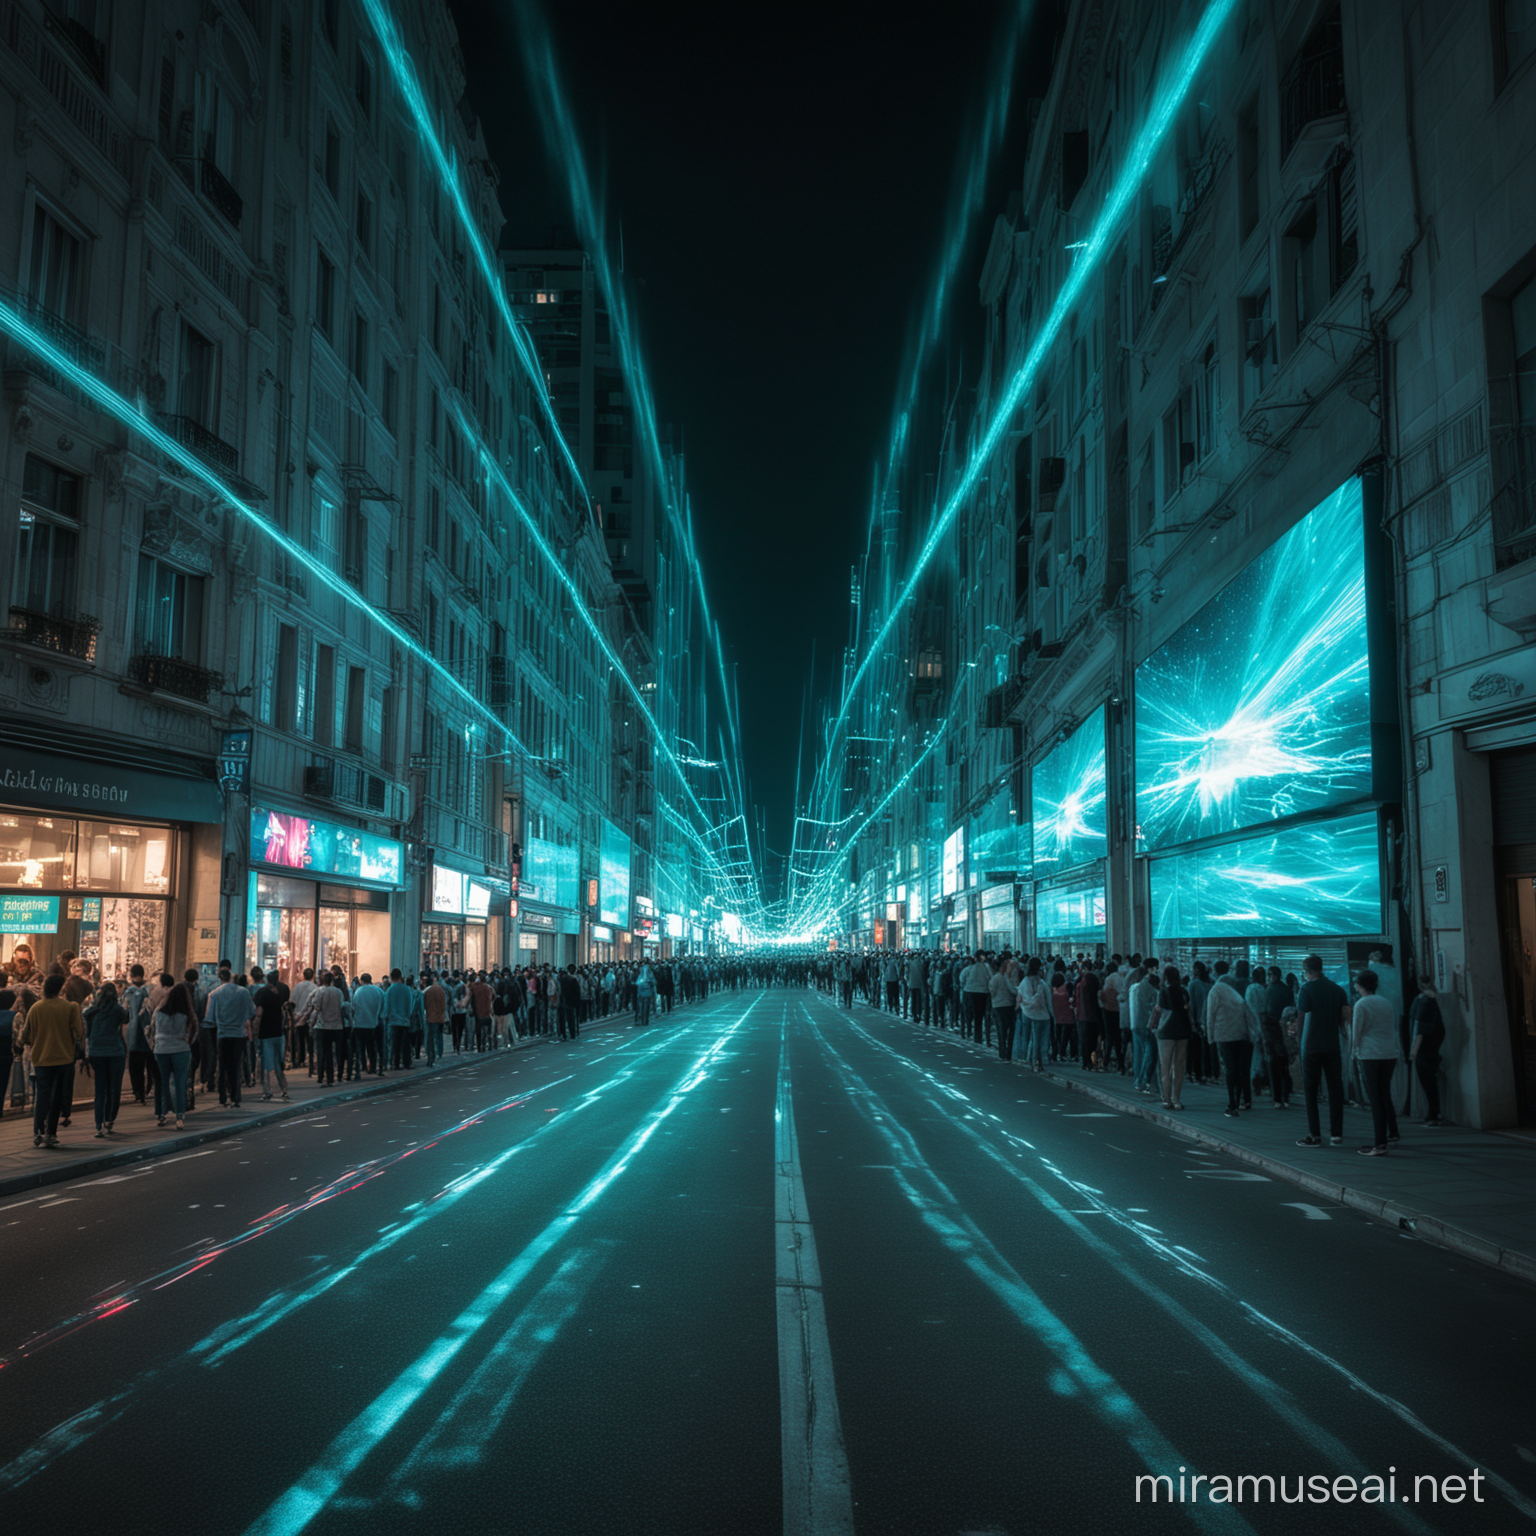 Vibrant Night Scene Crowded Street with Turquoise Laser Show